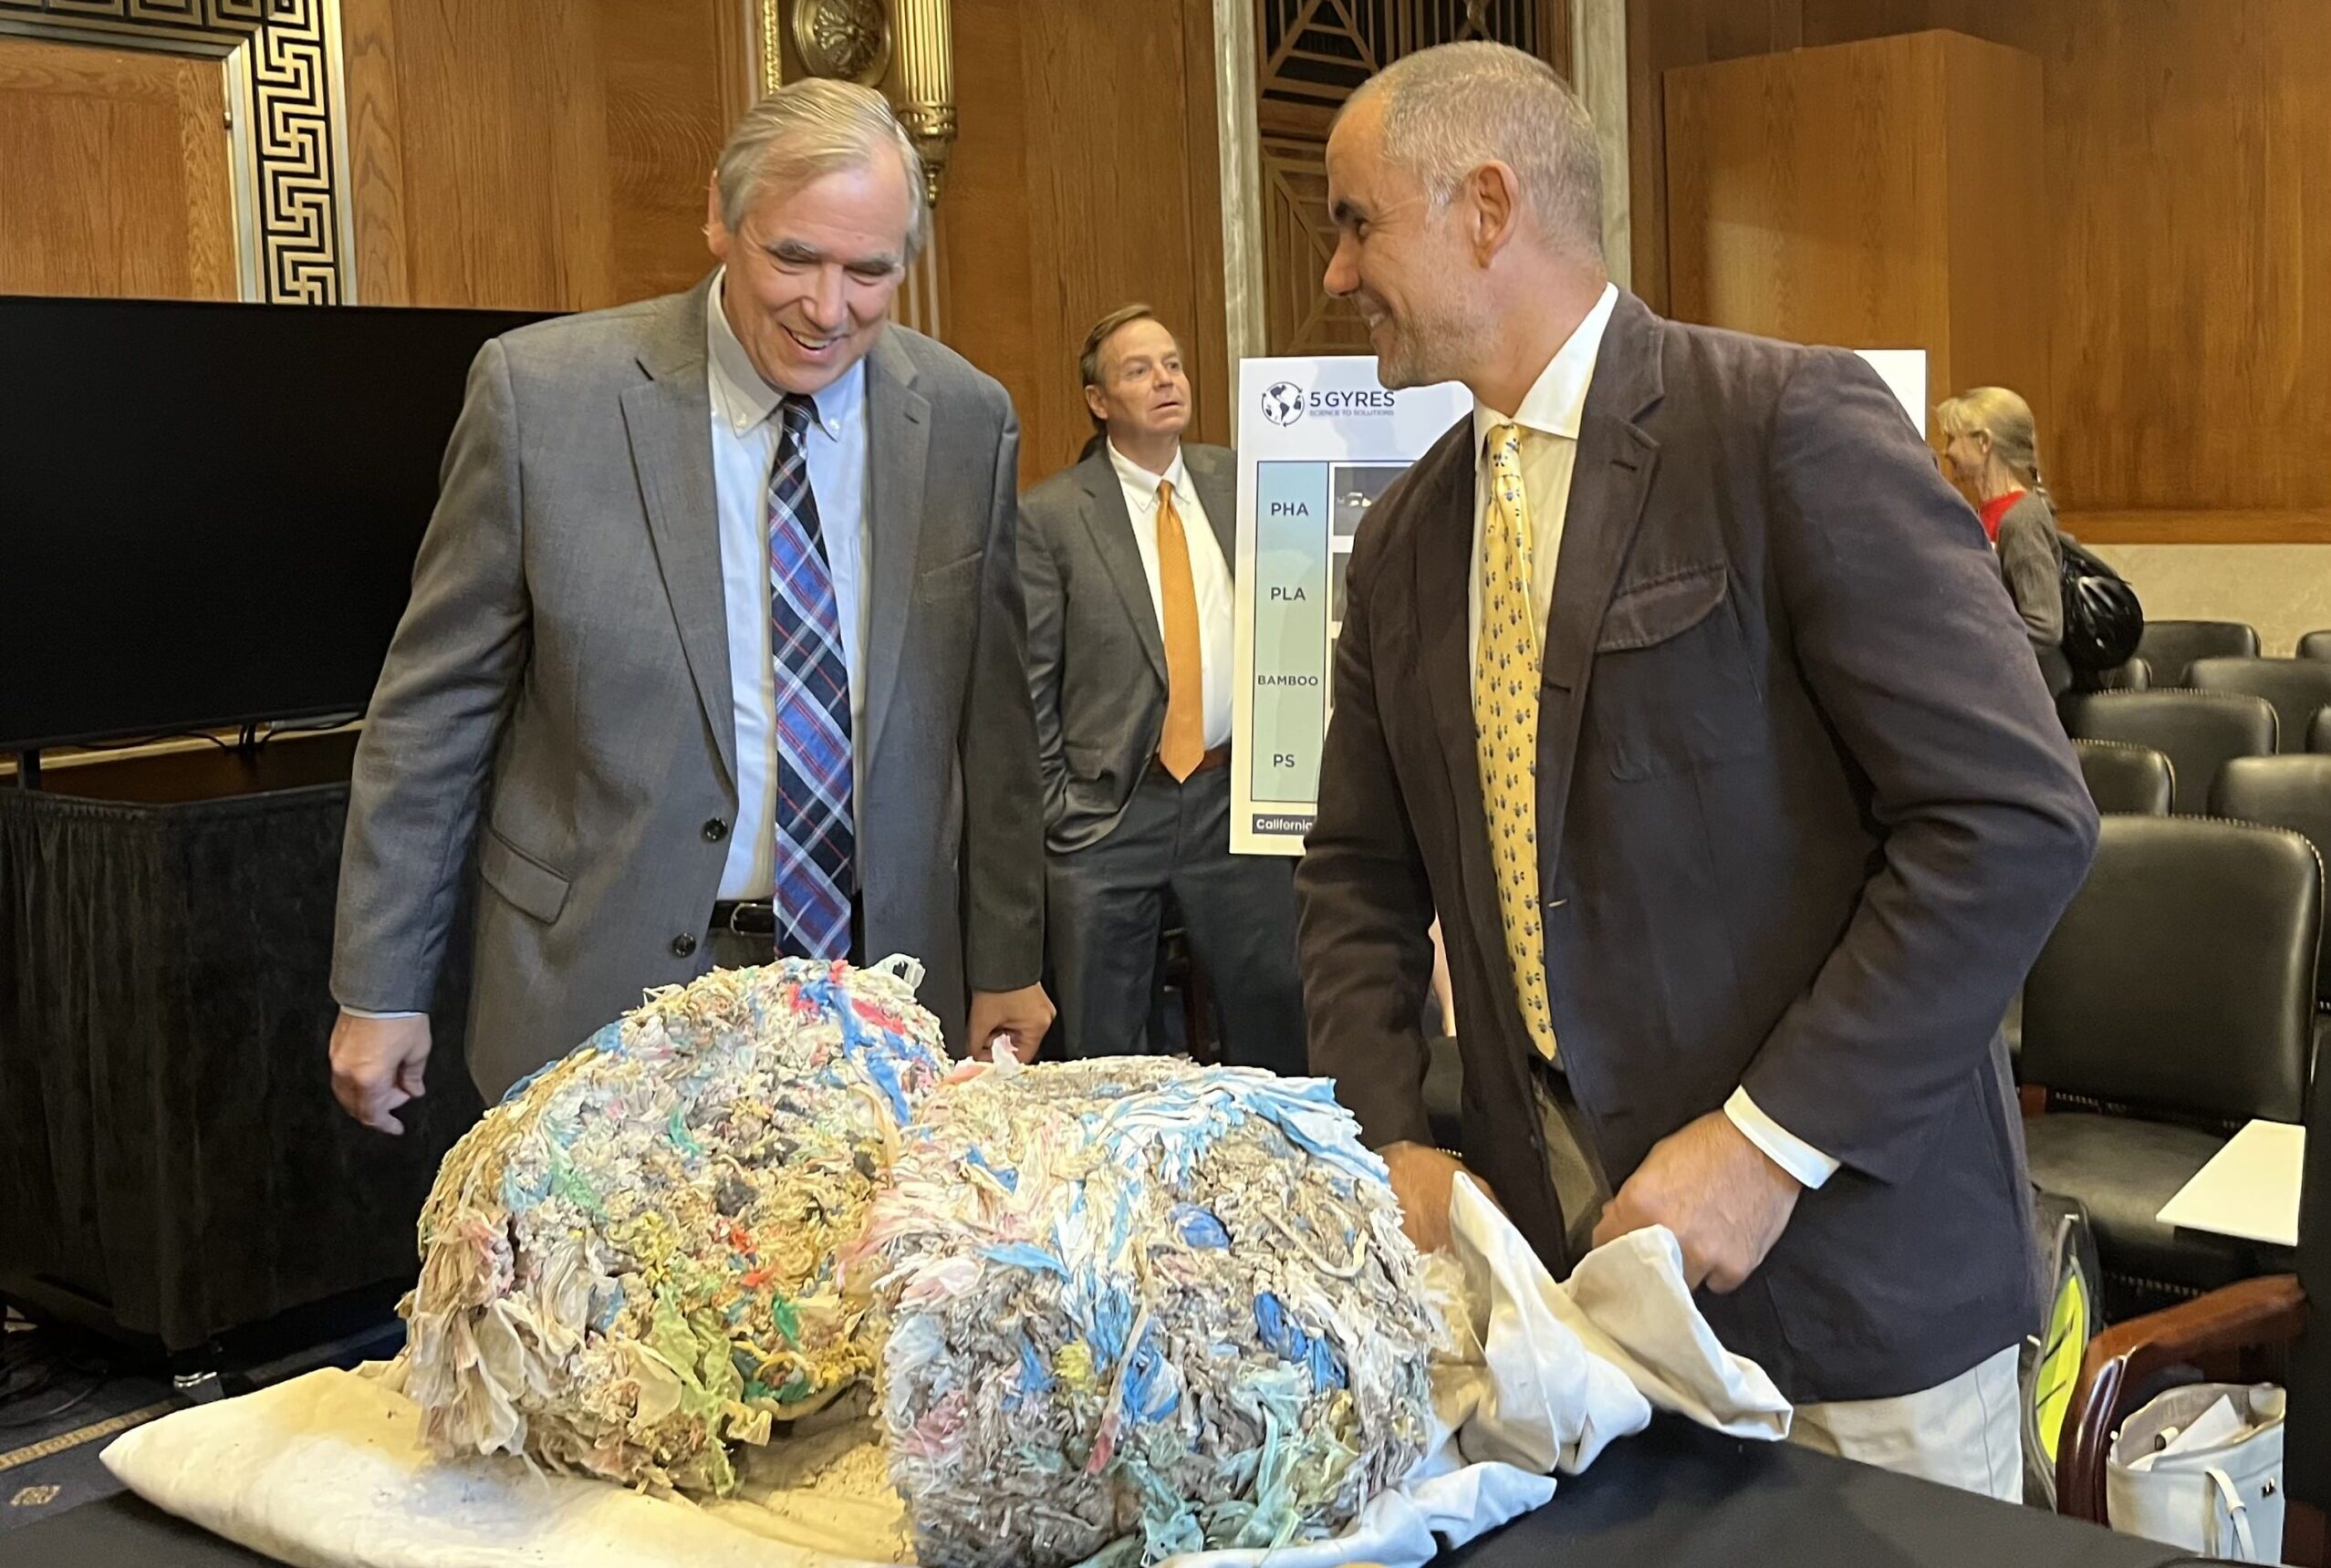 Experts debate solutions to the single-use plastics crisis from bioplastics to improved recycling